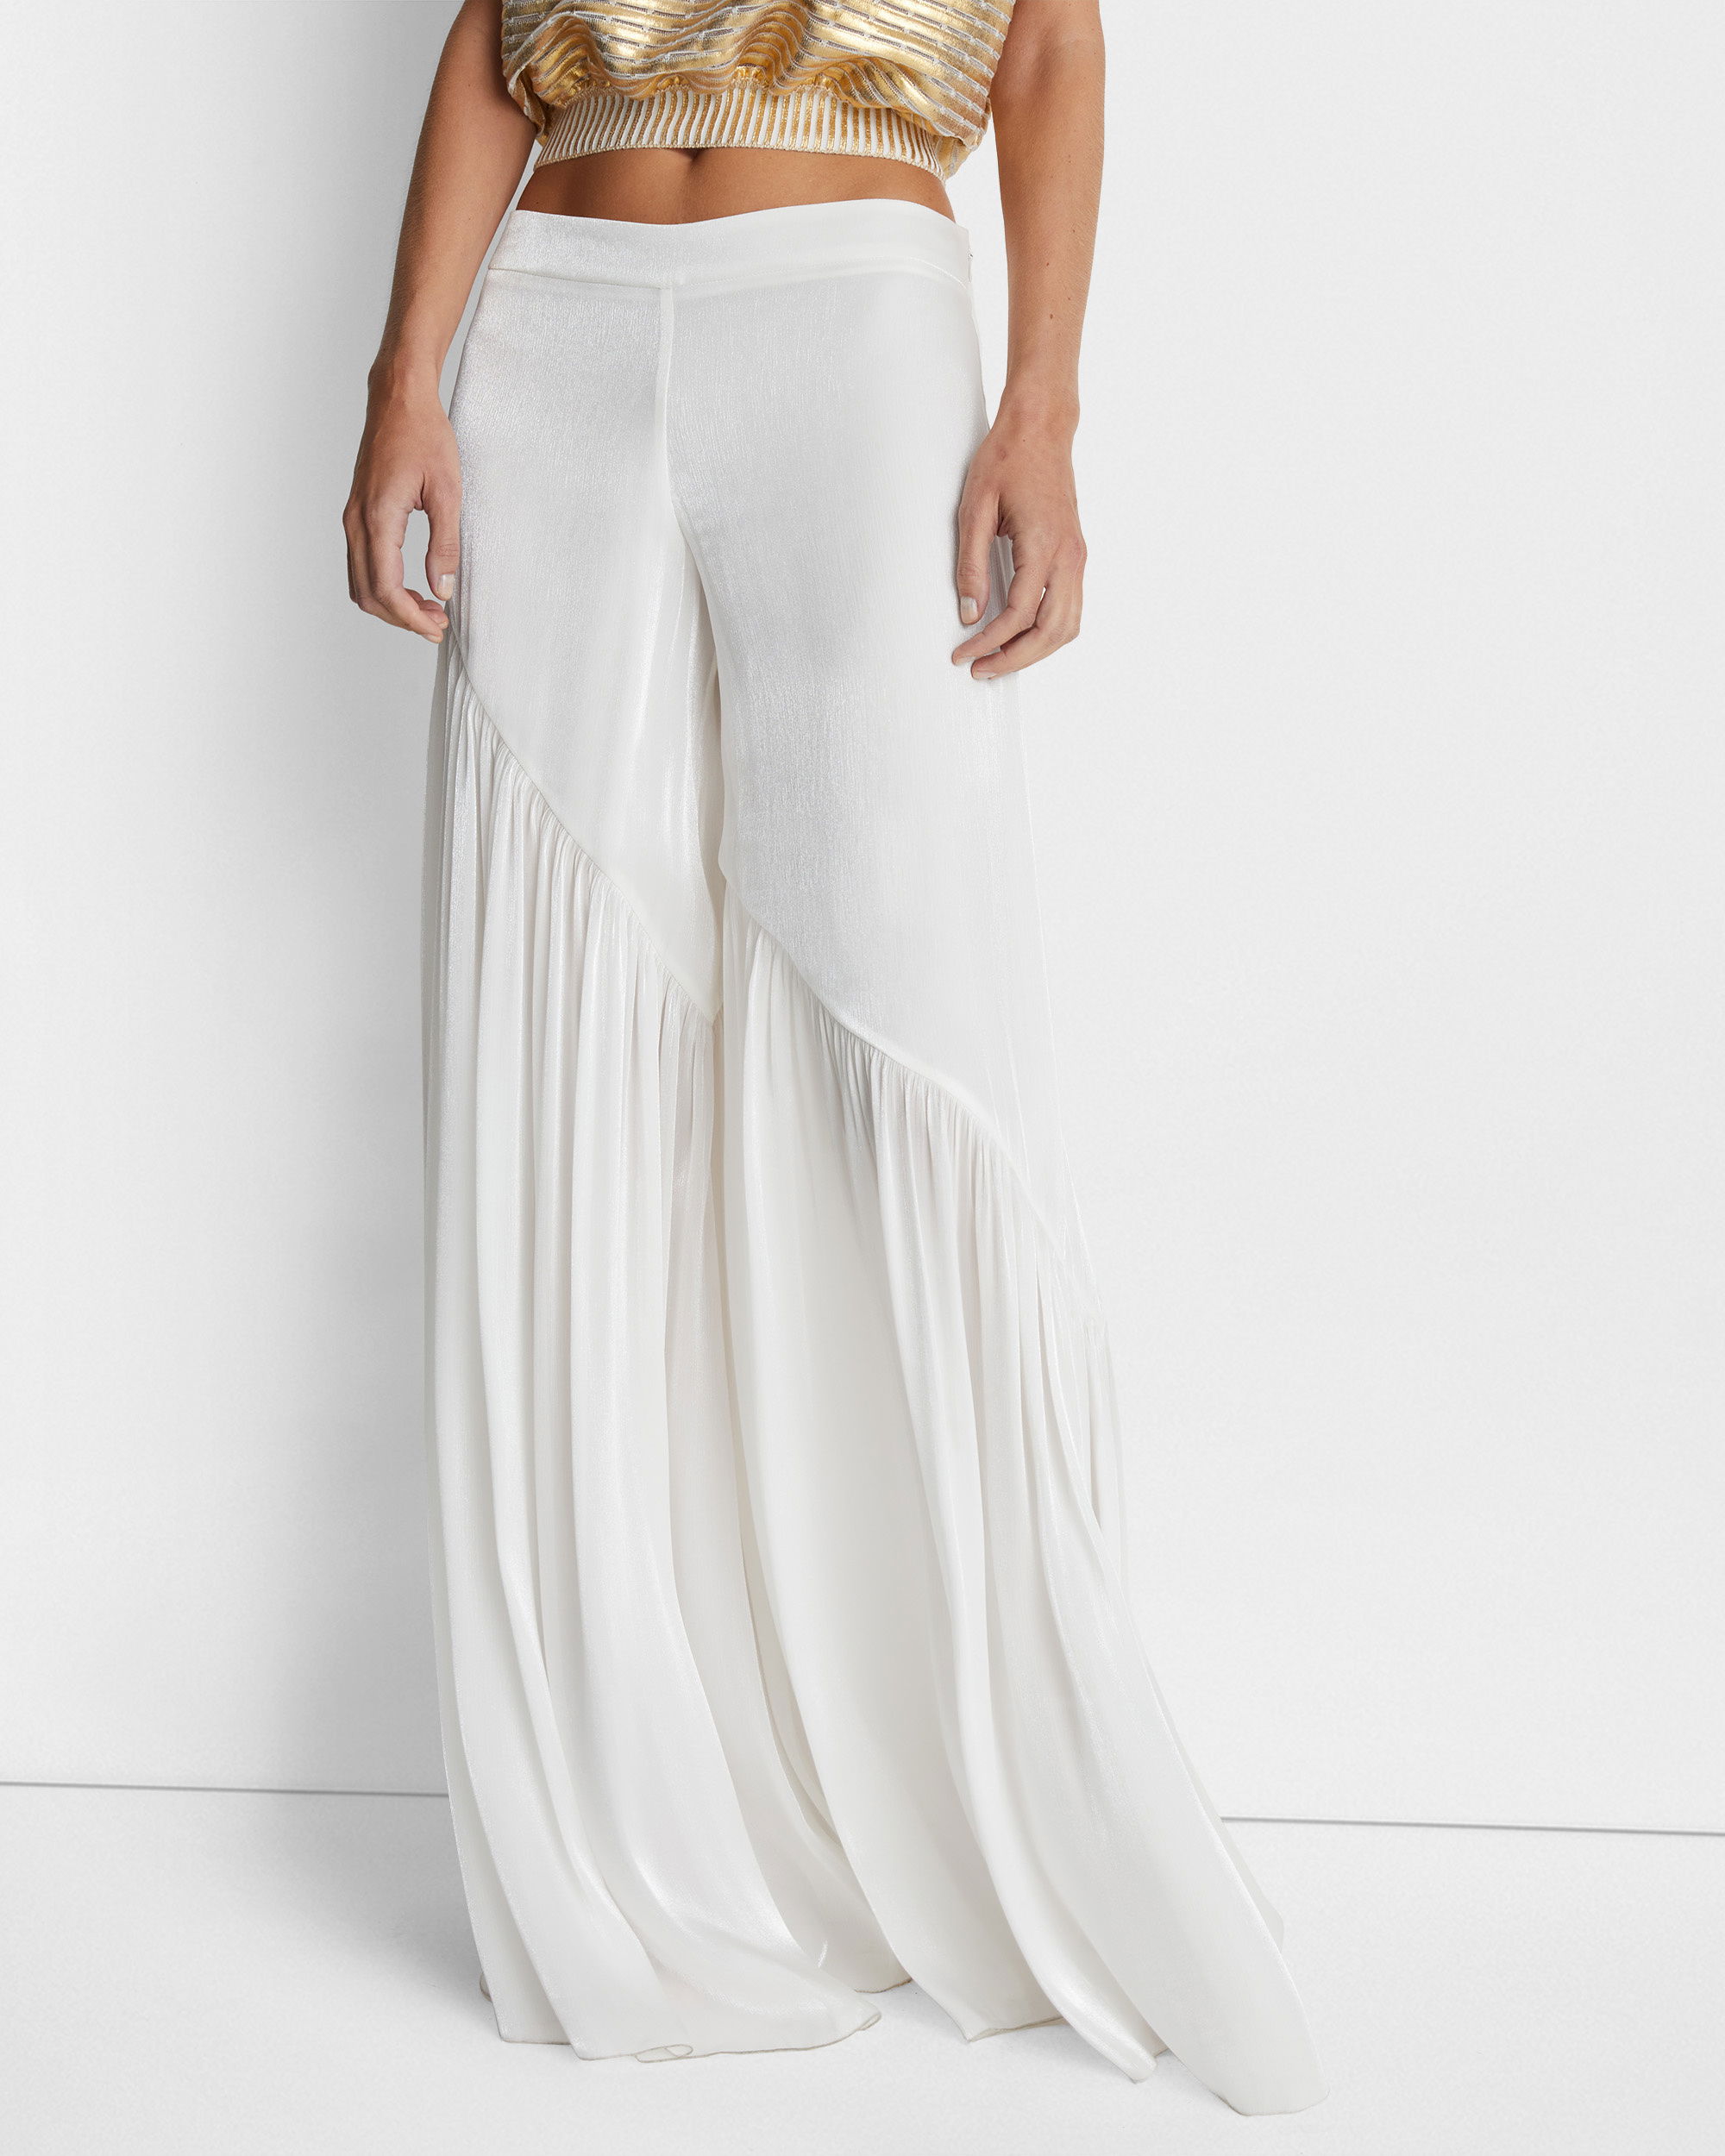 Loose-fitting pants with an asymmetrical design